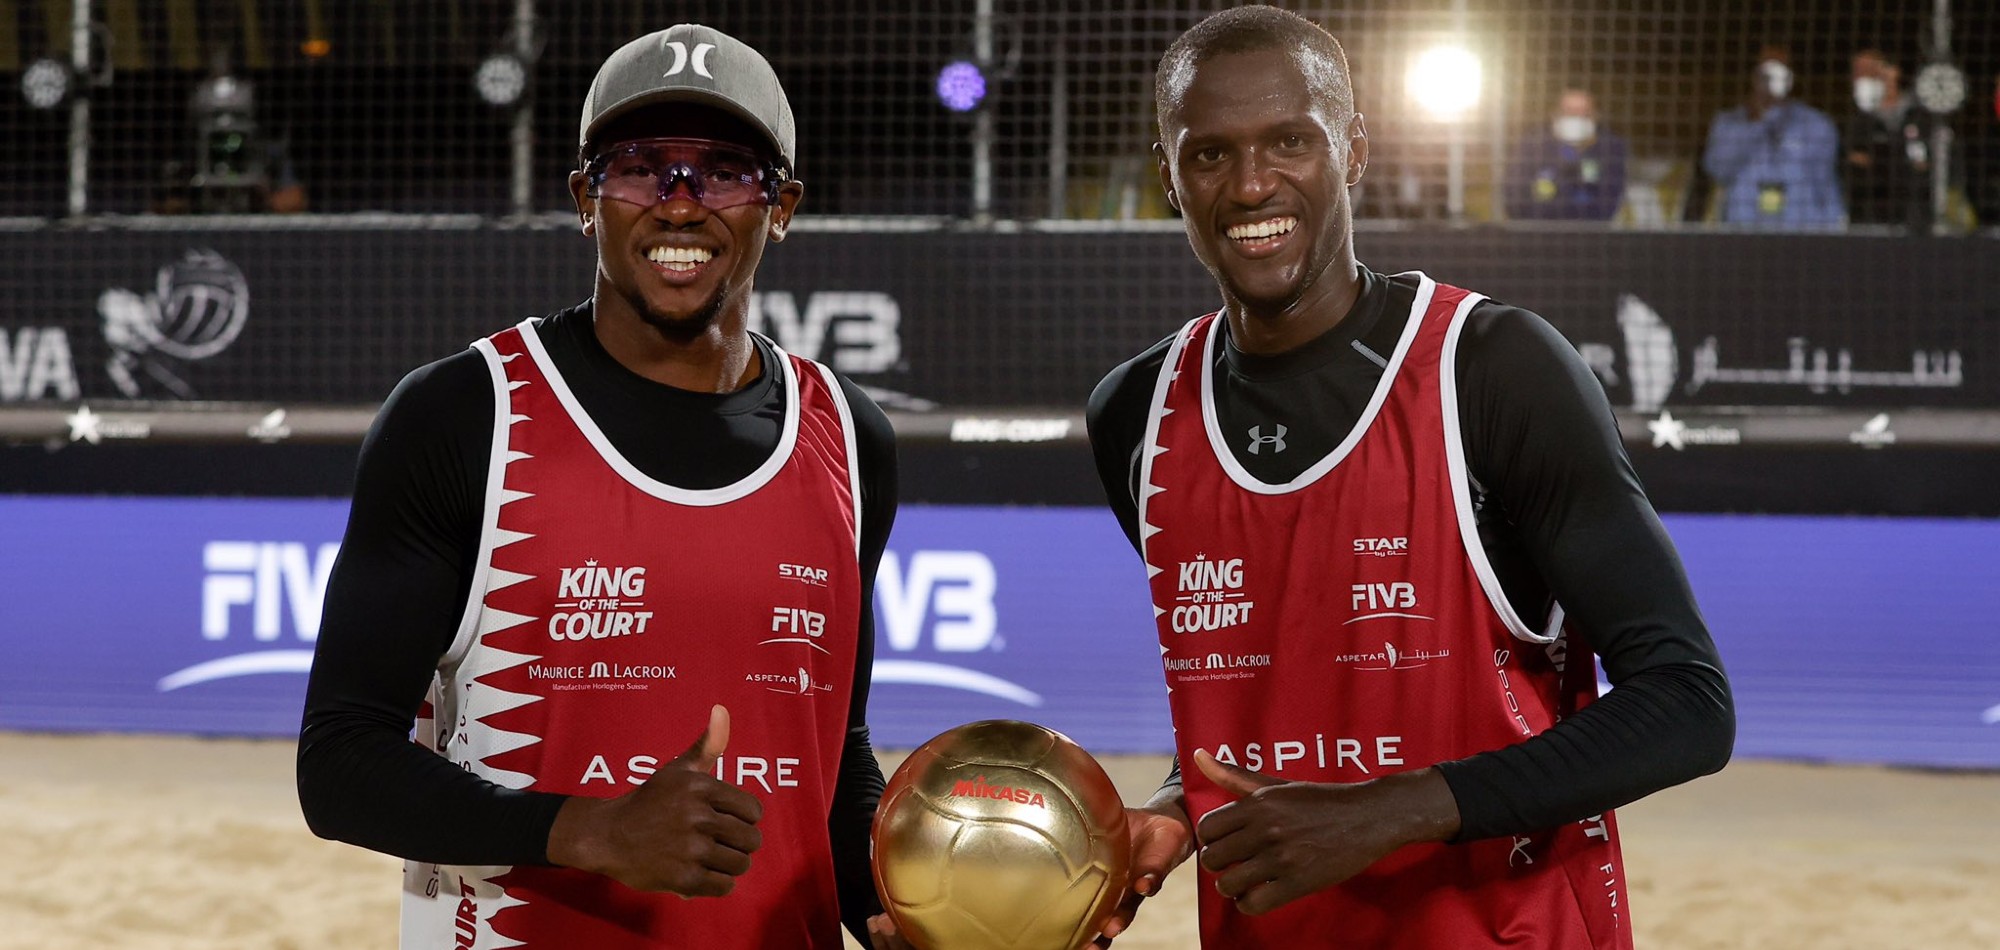 Qatar Beach Volleyball Duo Maintains Top of World Standings